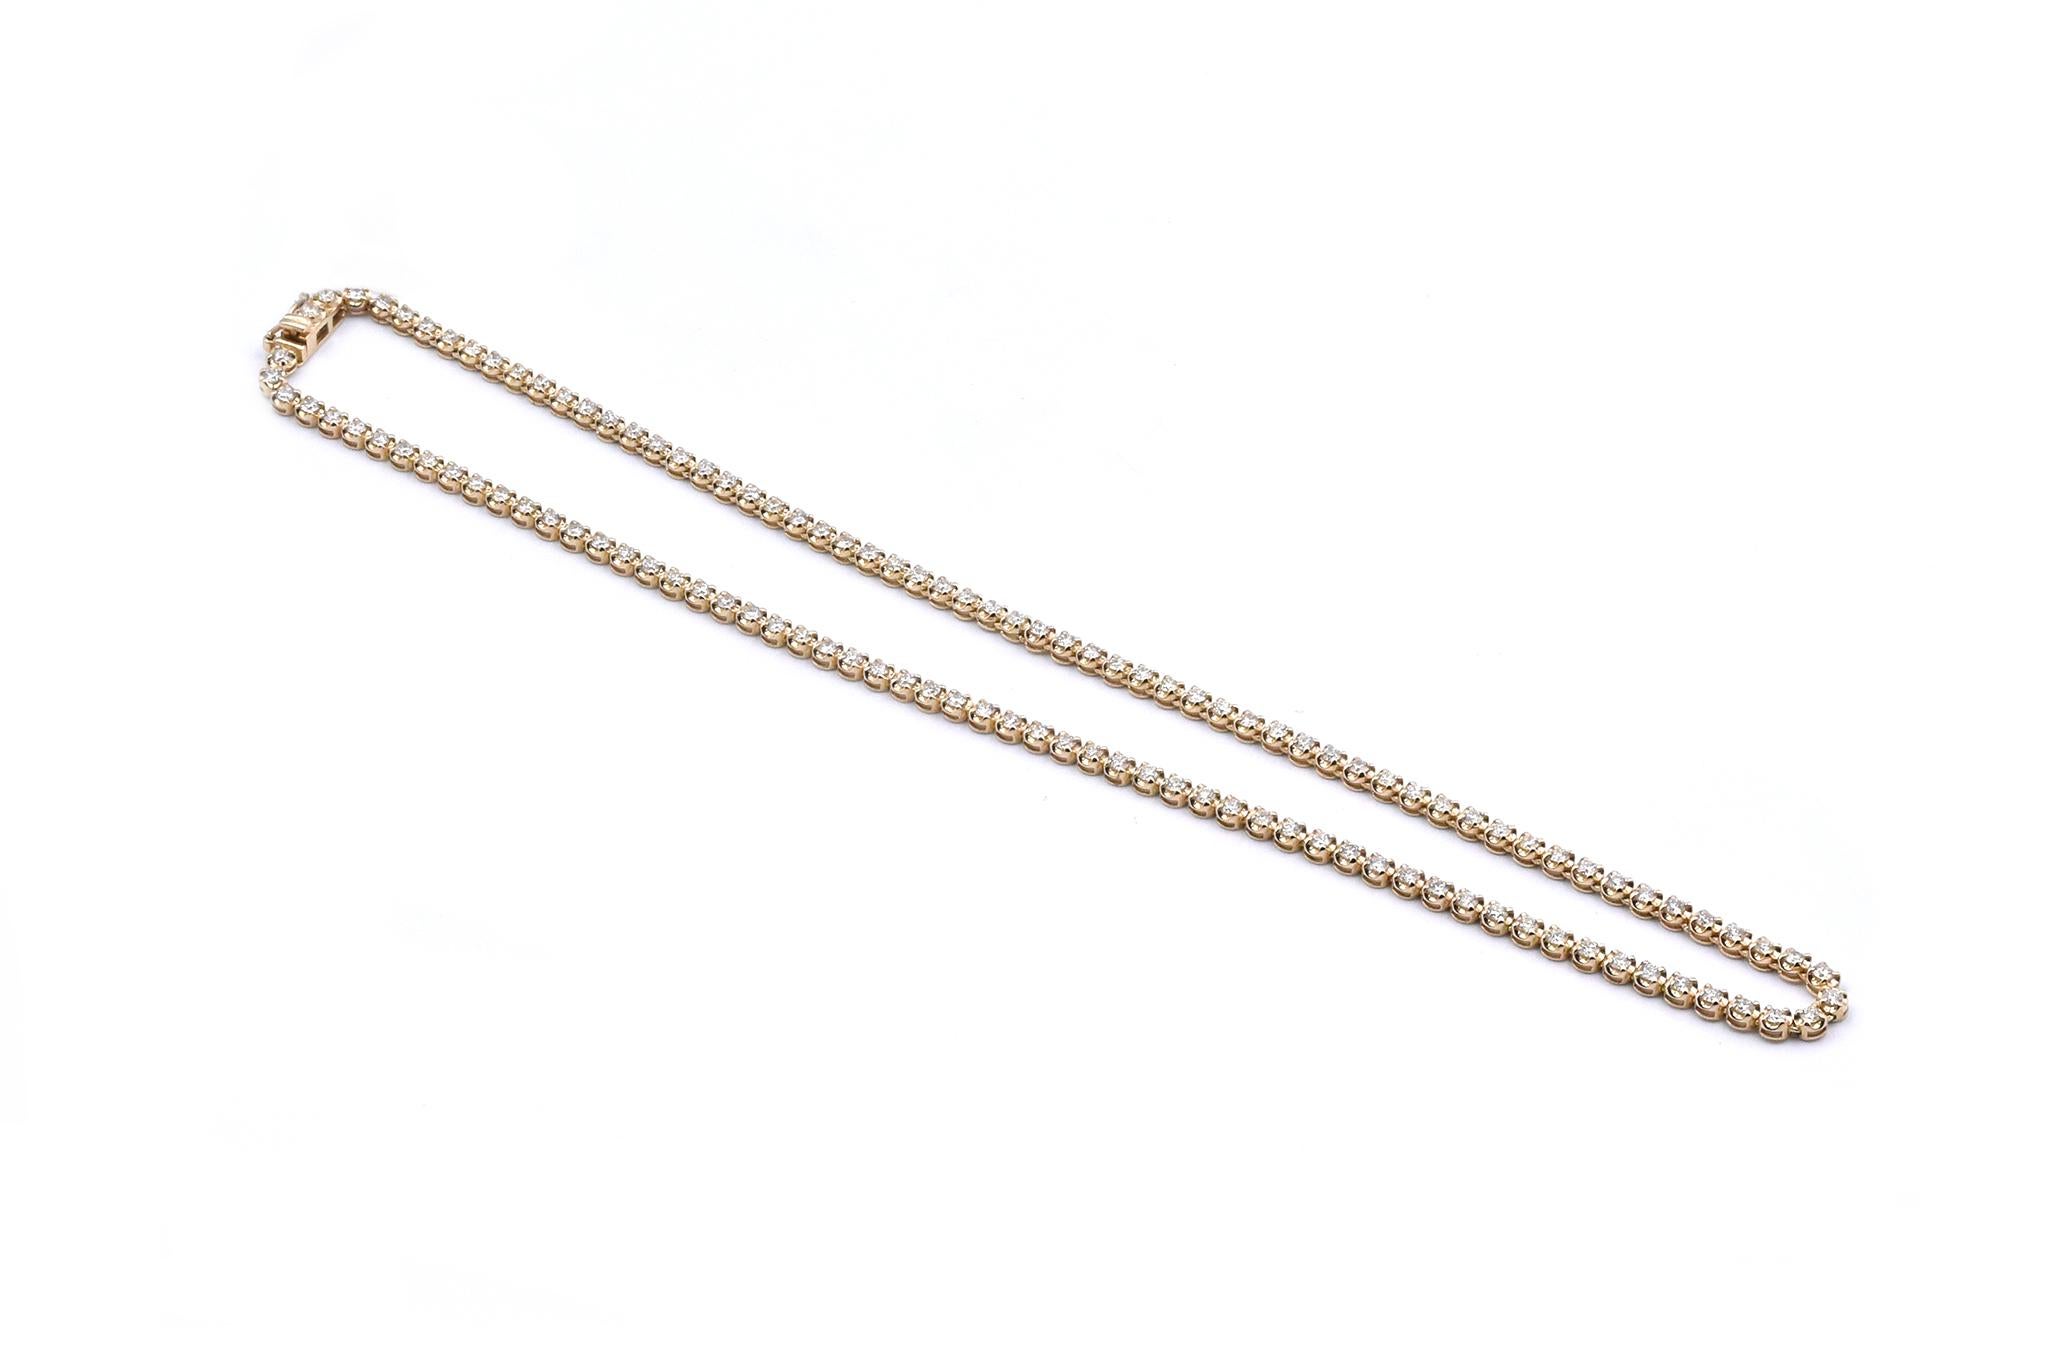 Material: 14K yellow gold
Diamonds: 121 round brilliant cut = 5.46cttw
Color: G
Clarity: VS2
Dimensions: necklace measures 16-inches
Weight: 14.18 grams
